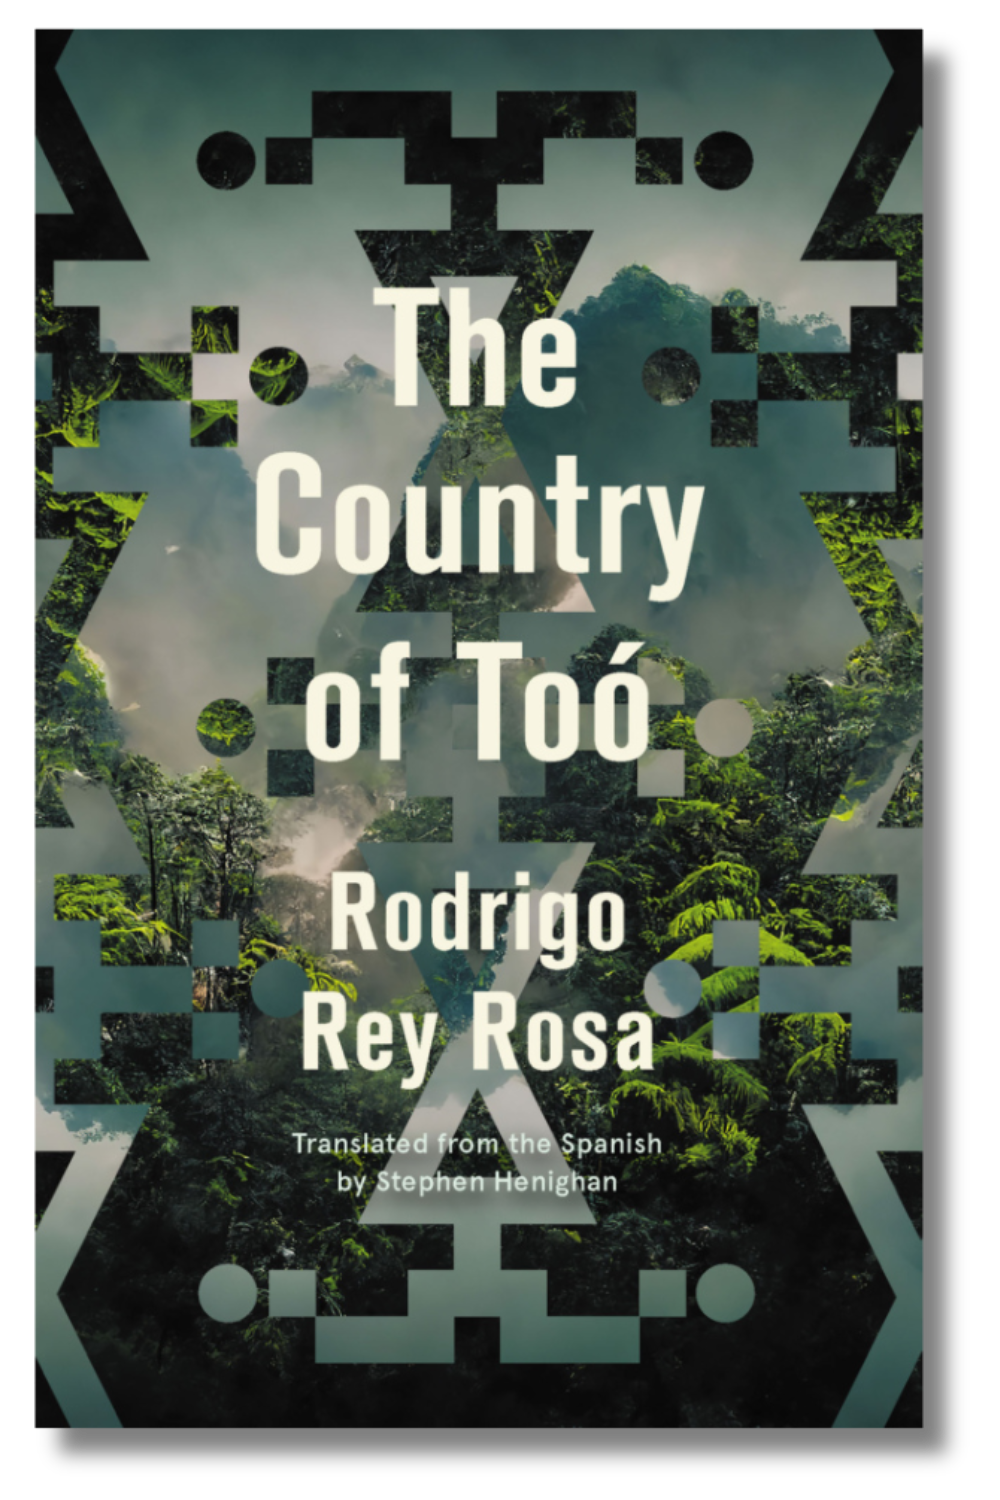 The cover of "The Country of Toó" by Rodrigo Rey Rosa, translated by Stephen Henighan